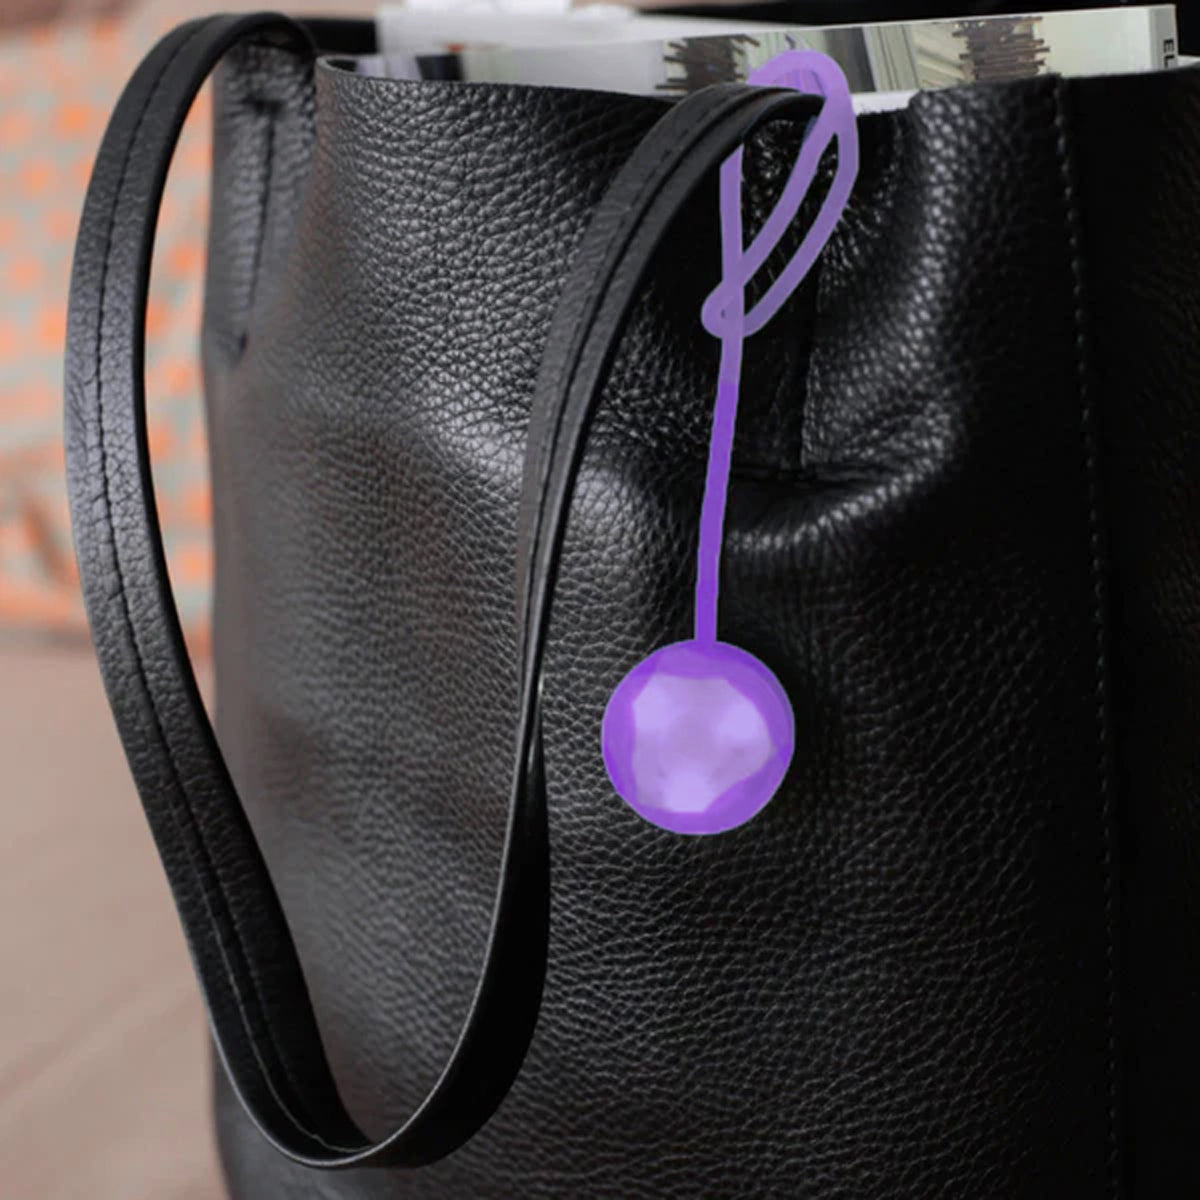 Kikkerland Purse Light Bright LED Silicone – Attach To Anything